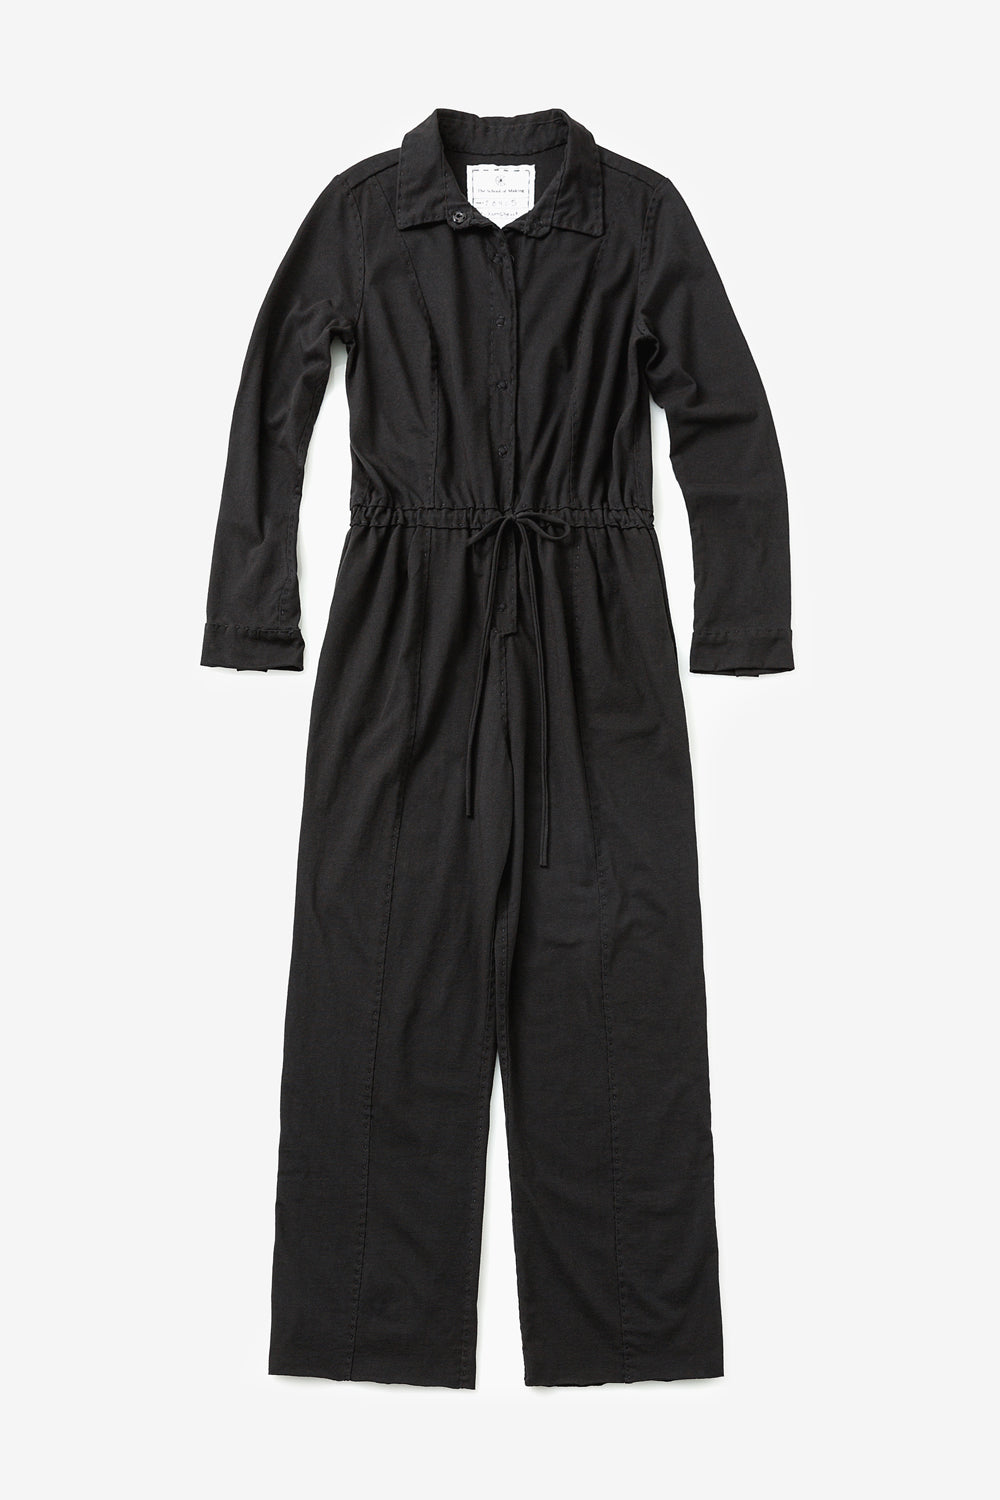 The School of Making Jumpsuit Pattern in Black Single Layer Organic Medium Weight Cotton Jersey with Tie Waistband and Collar